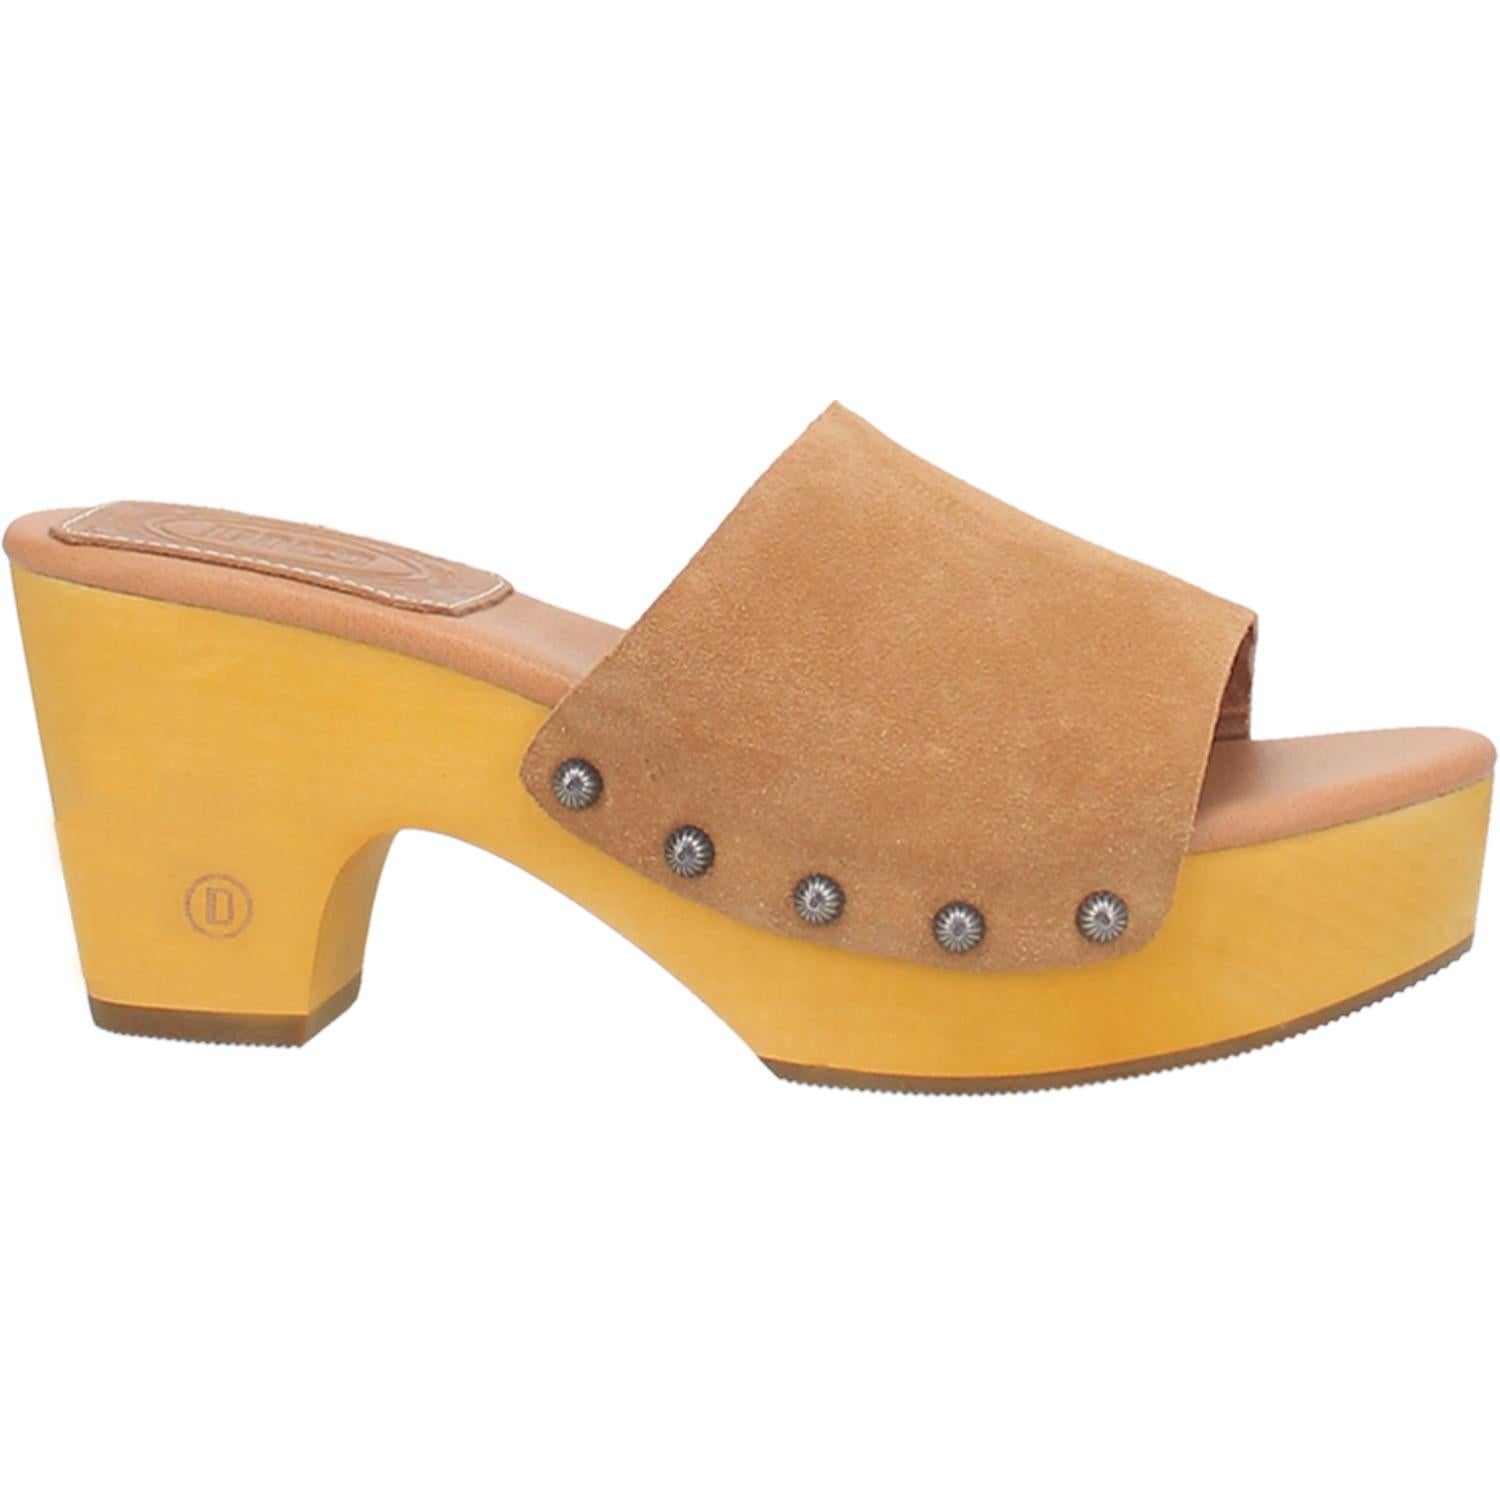 Beechwood Suede Leather Studded Platform Clogs ~ TAN SUEDE (DS) DP